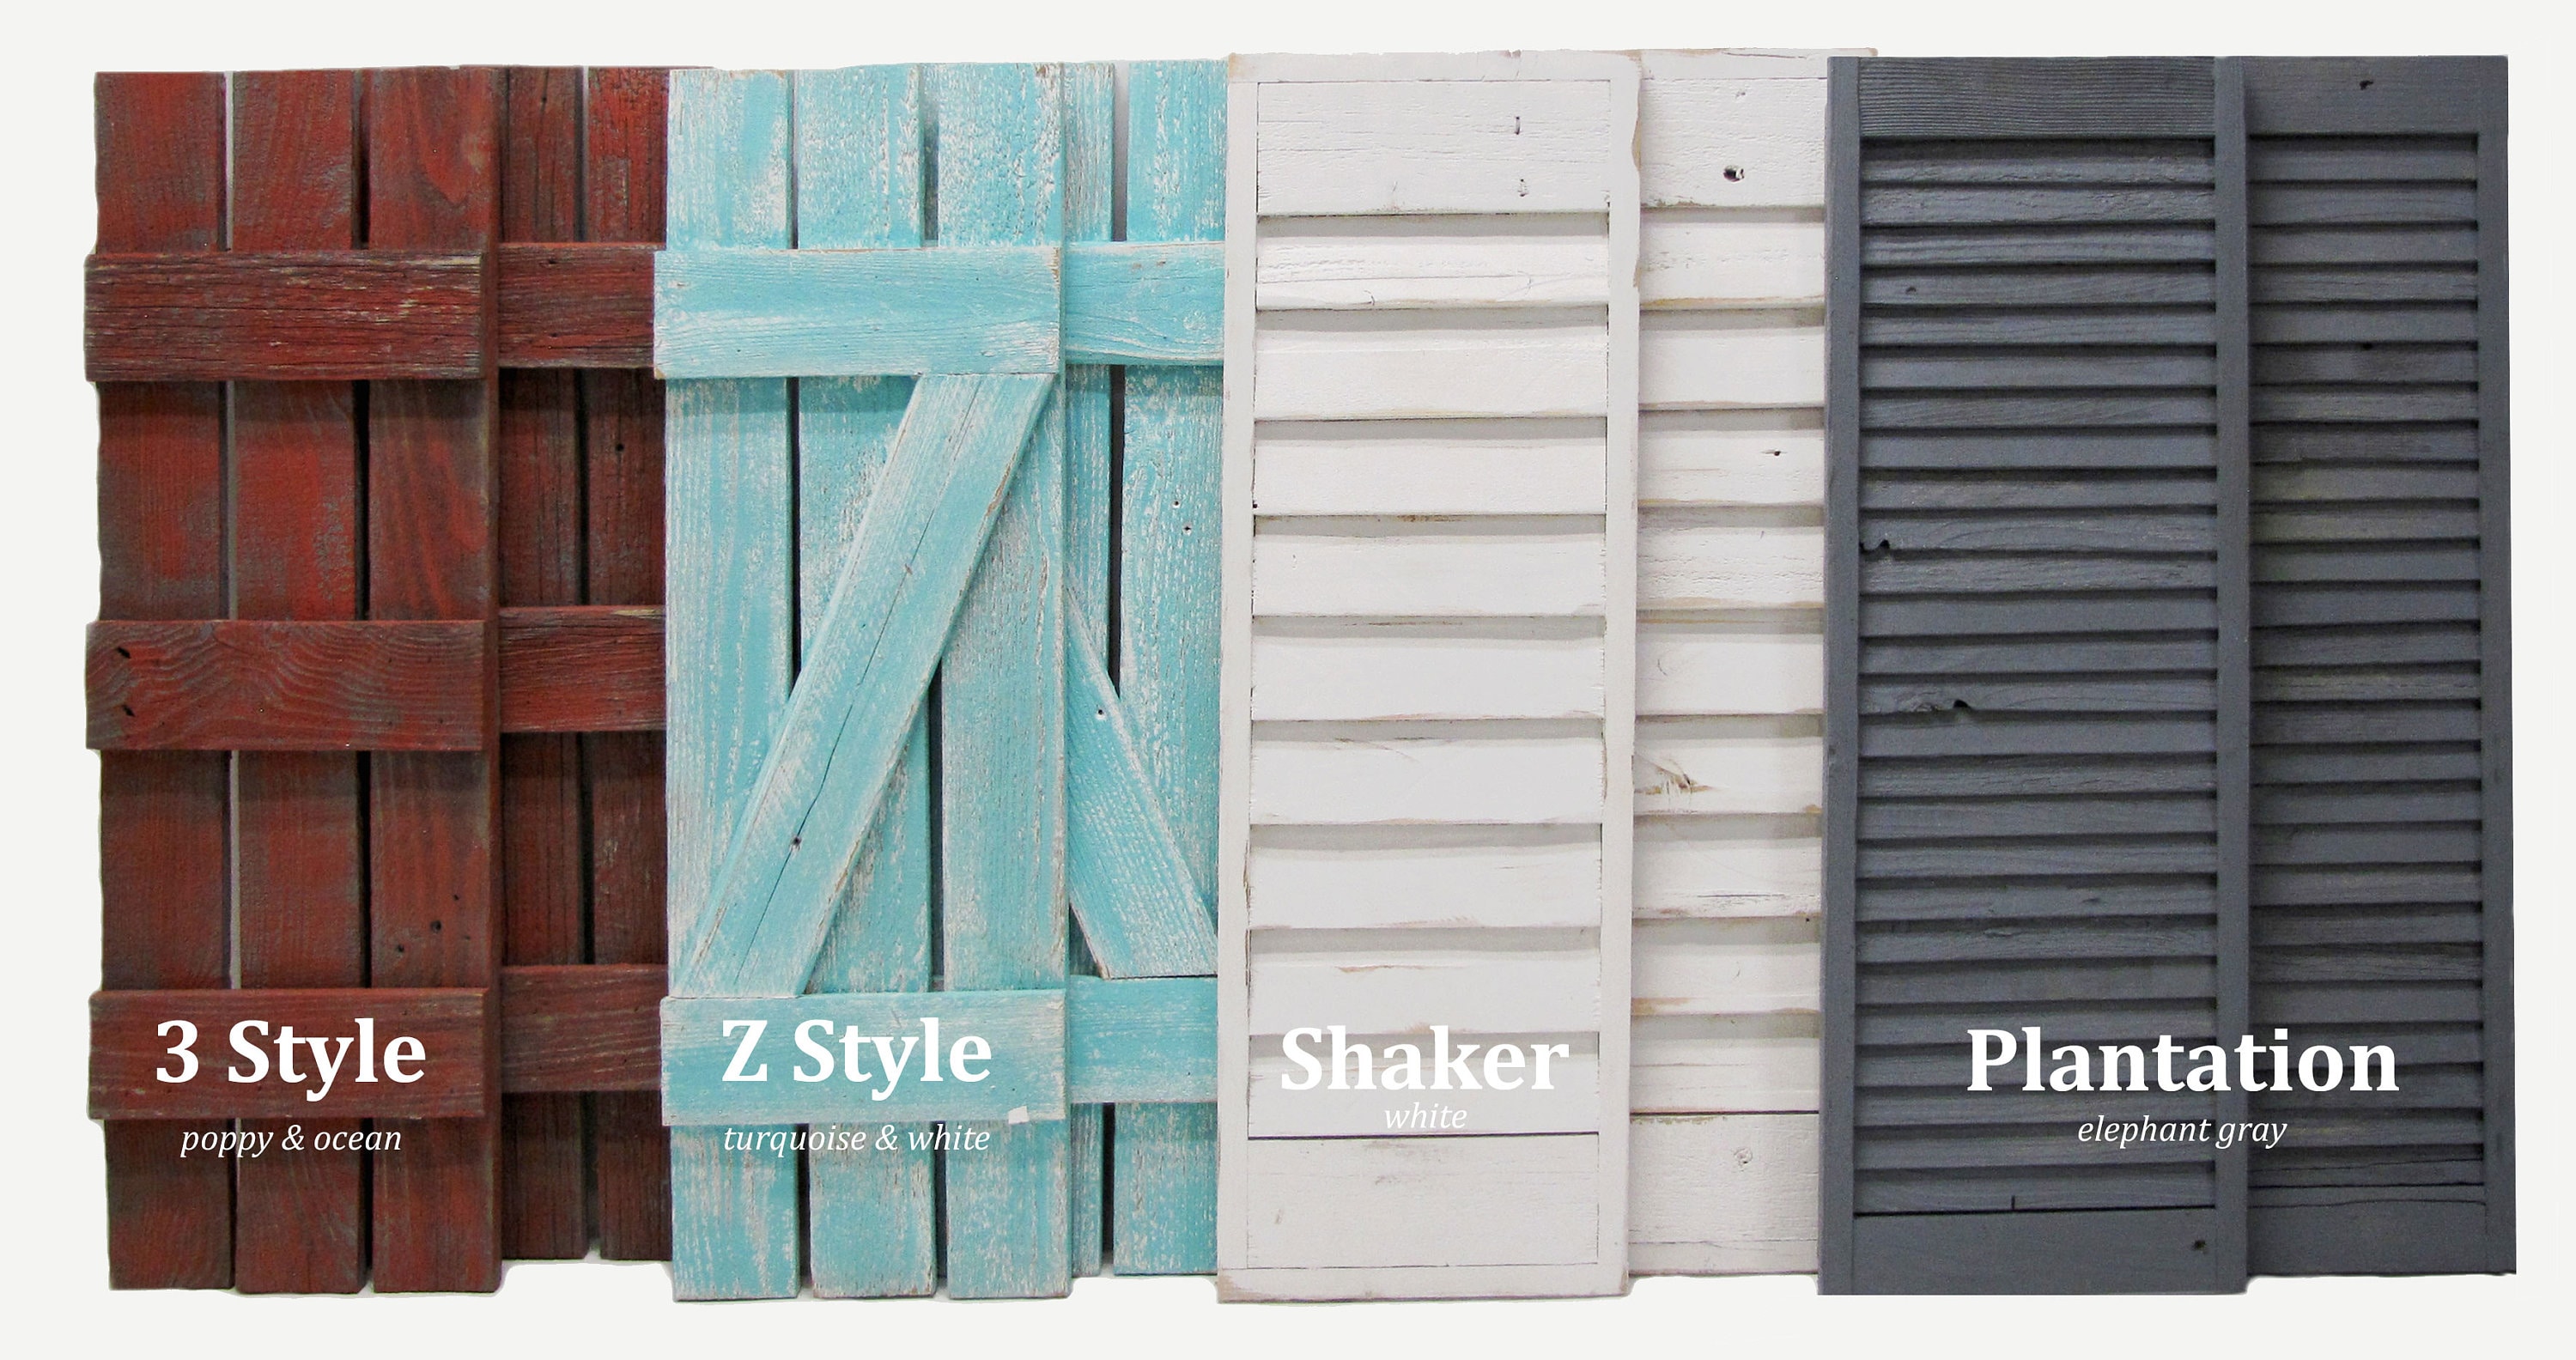 Rustic Barnwood Window Shutters (2) 11" wide X 33" tall for 23.5"X33" Window Pane Mirror (mirror sold separately) Old Wood Wall Decor.